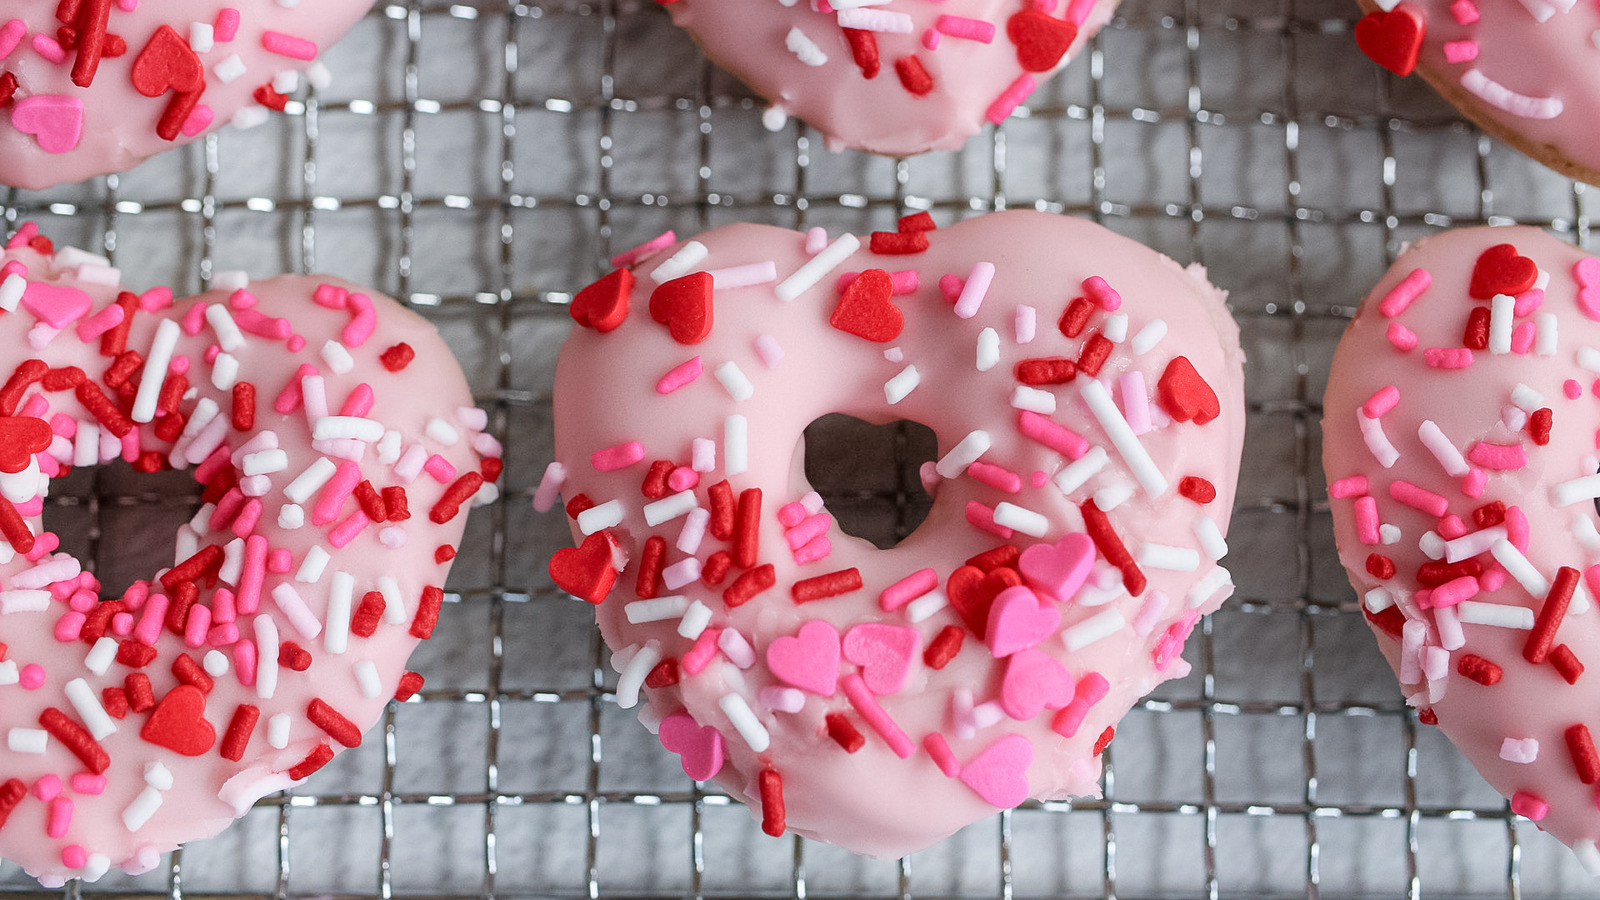 8 Heart-Shaped and Pink Fast Food For Valentine's Day